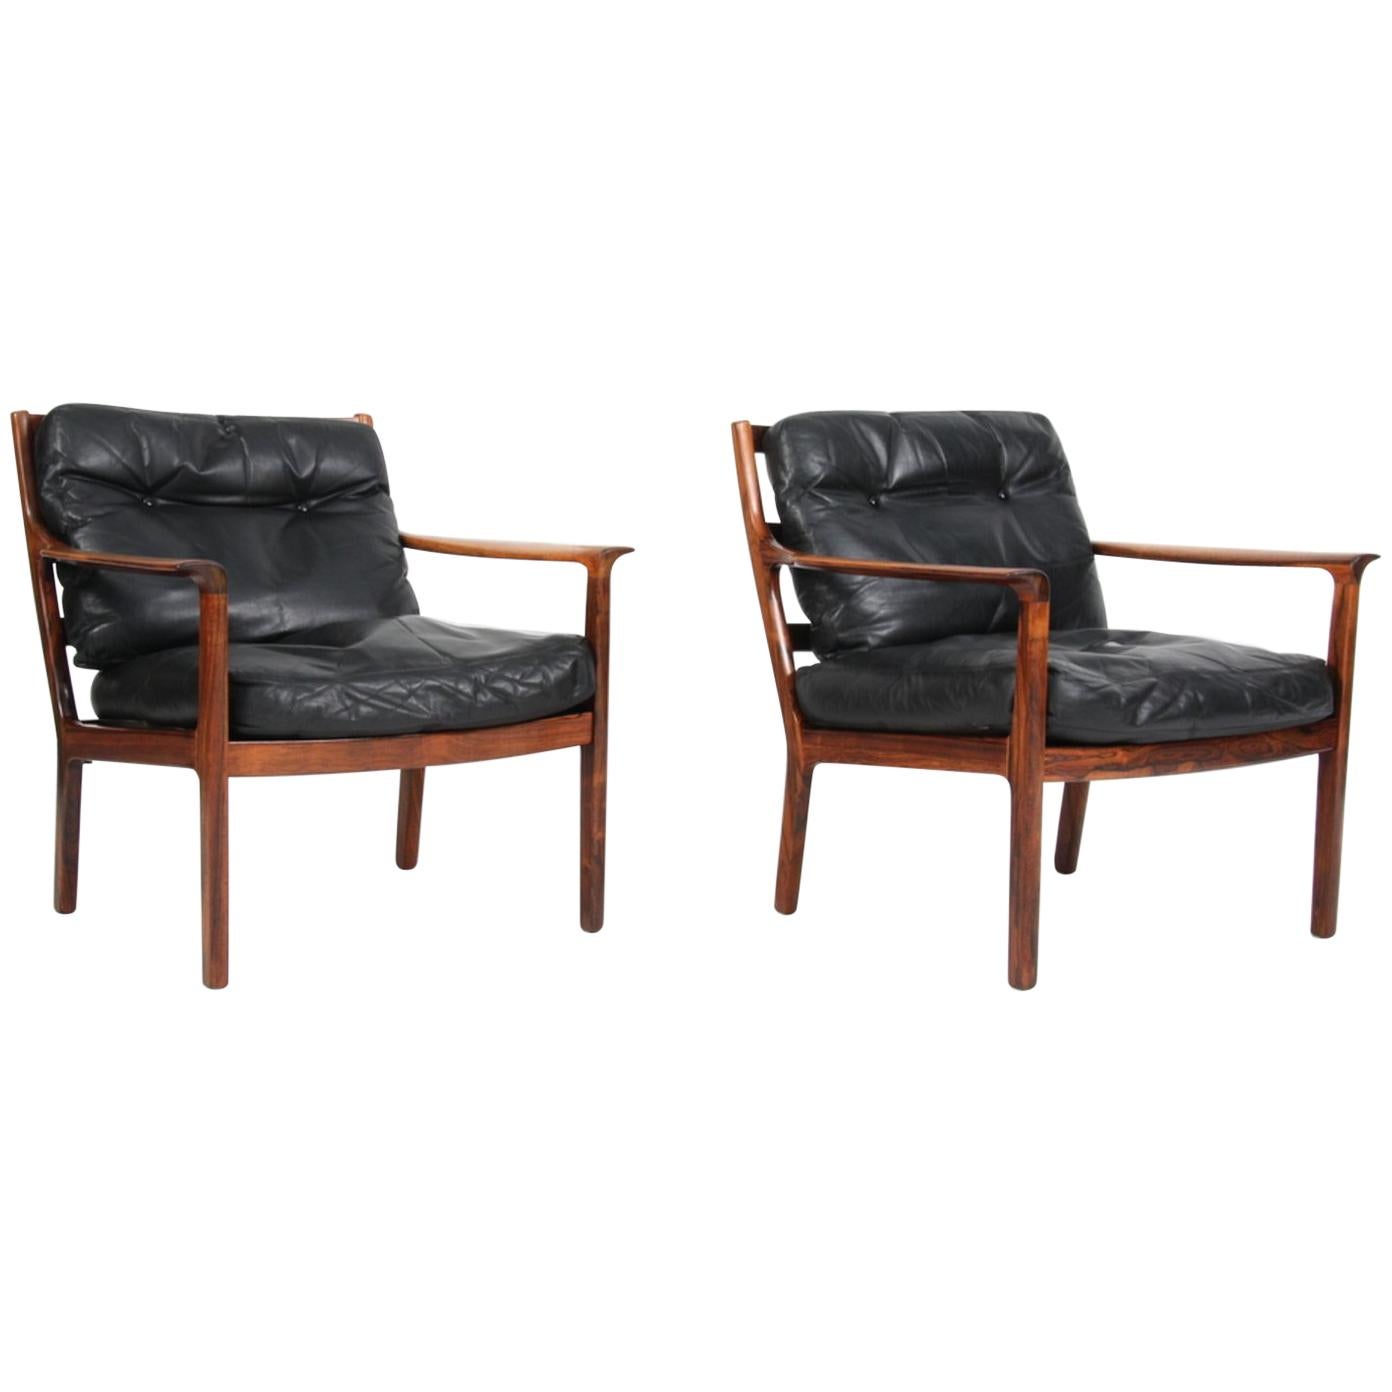 Fredrik Kayser Lounge Chair in Rosewood and Black Original Leather, 1960s